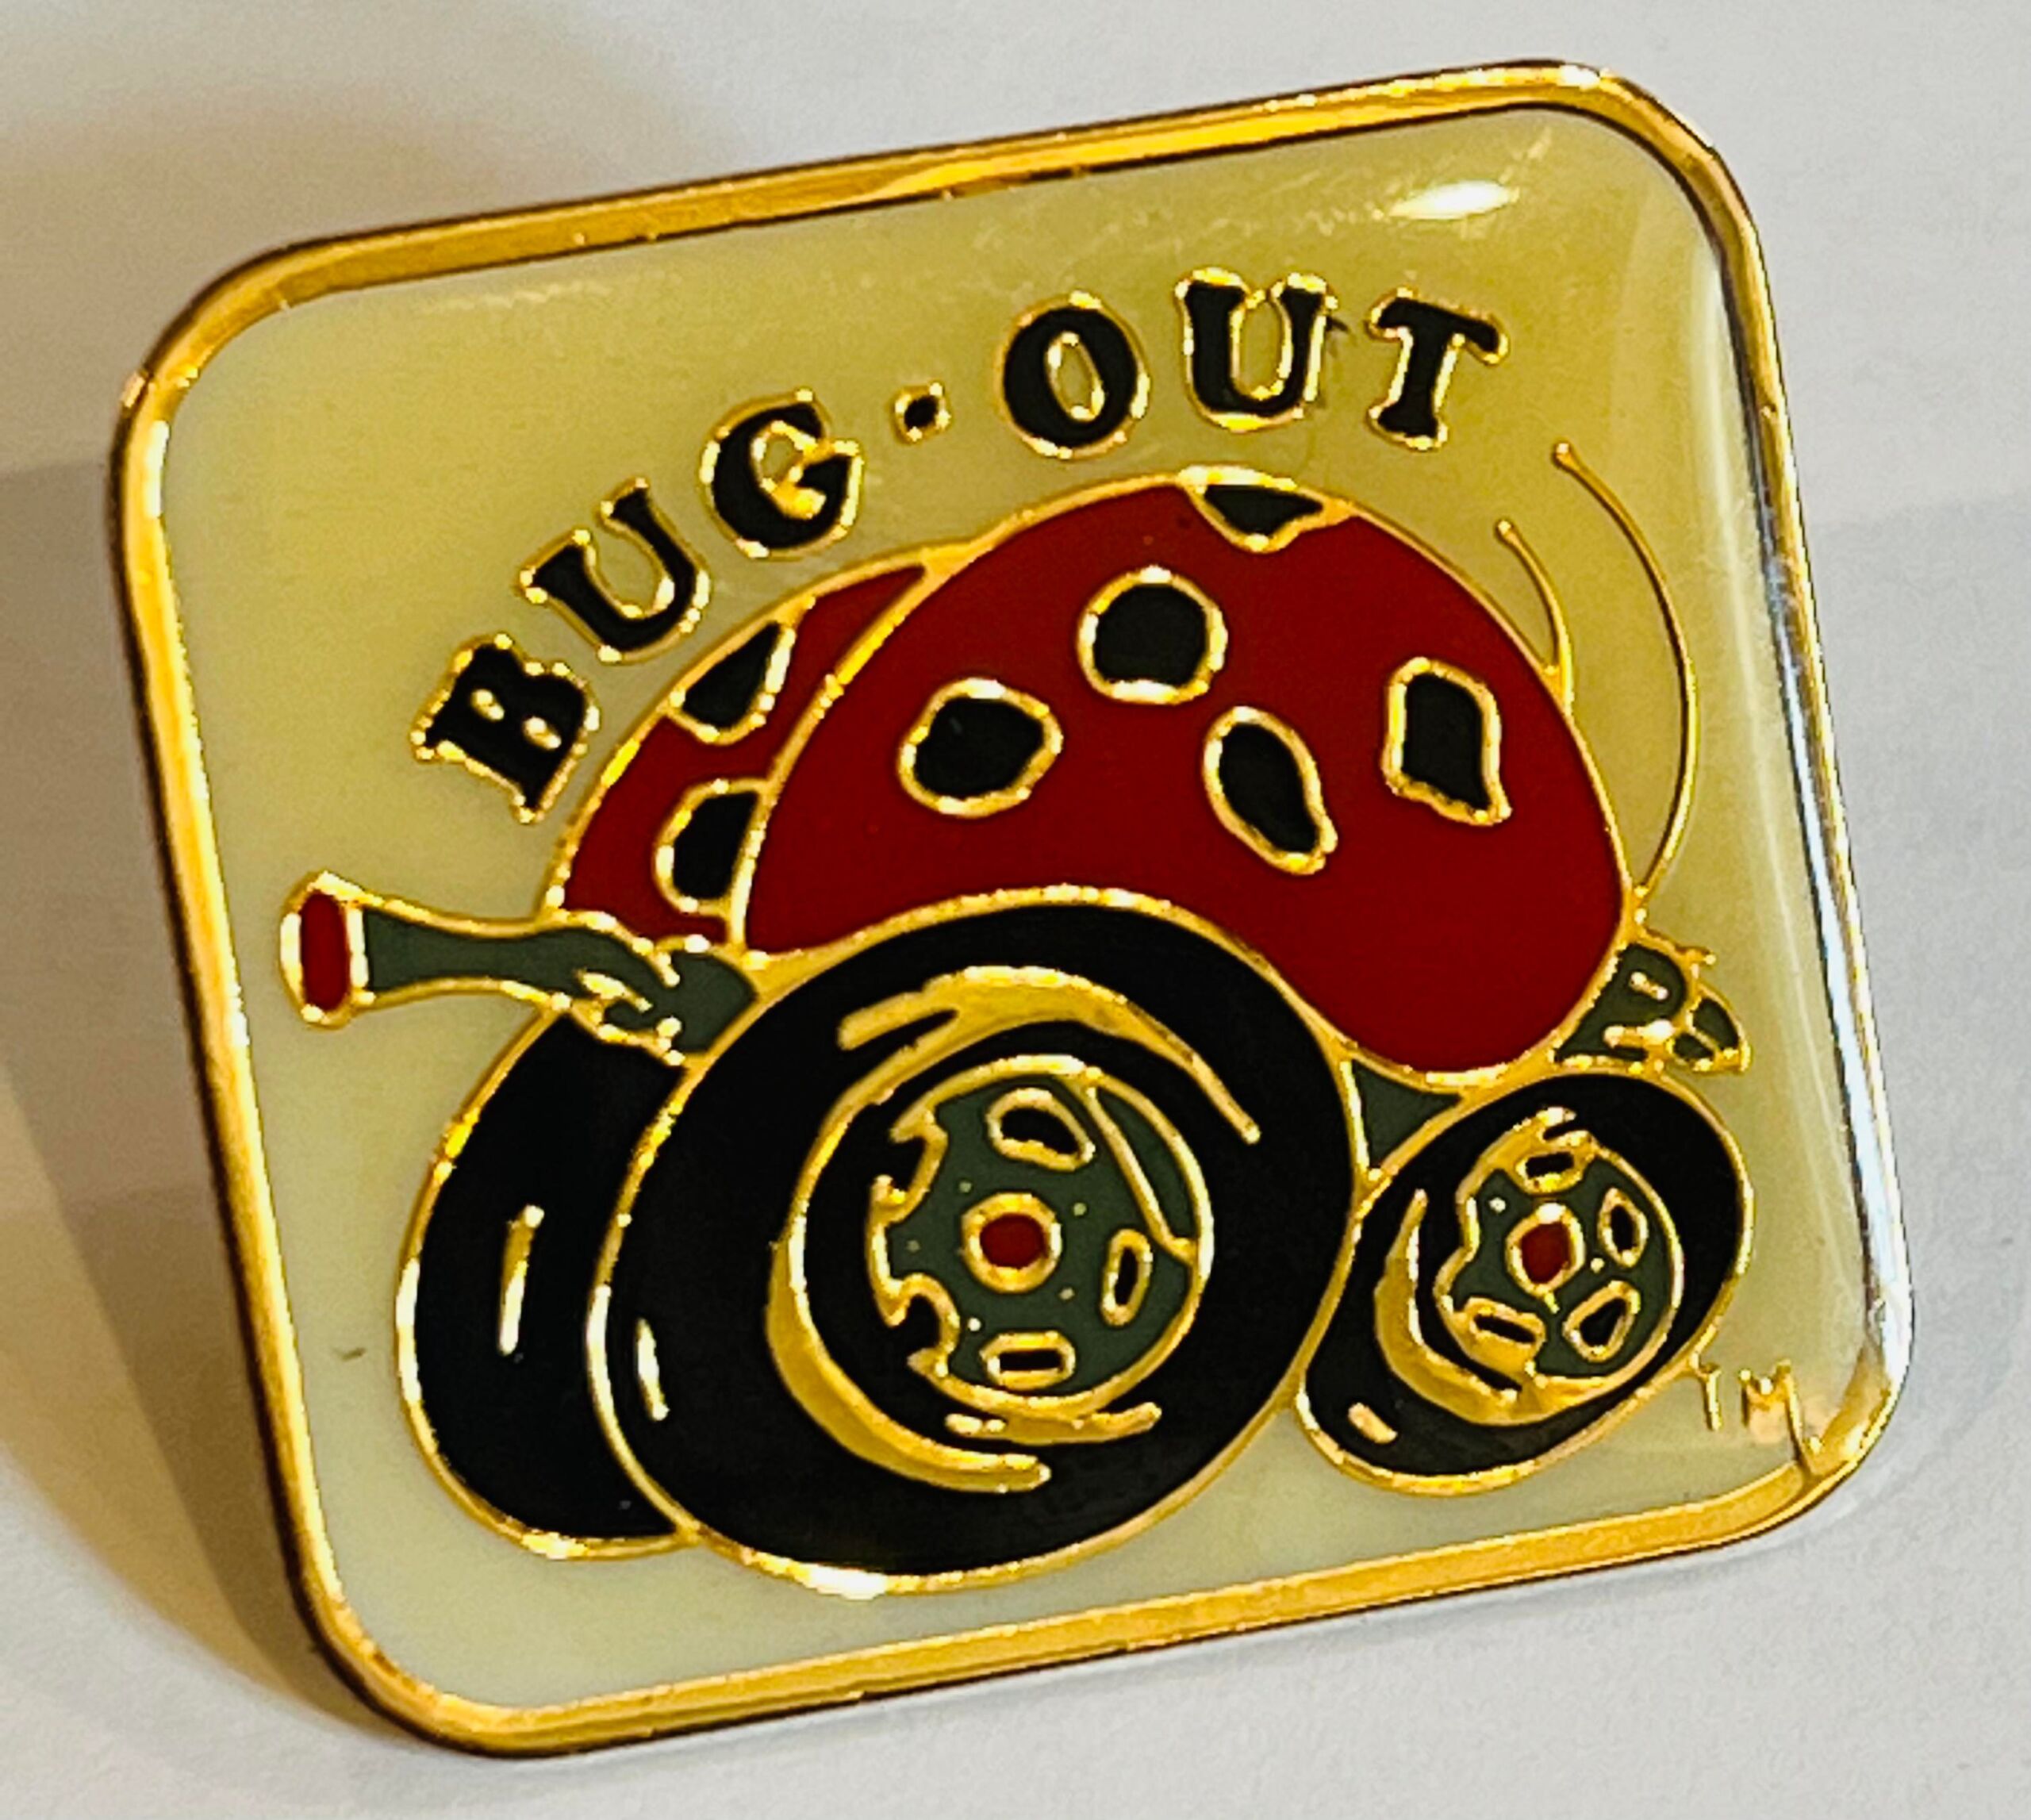 BugOut – Hat Pins